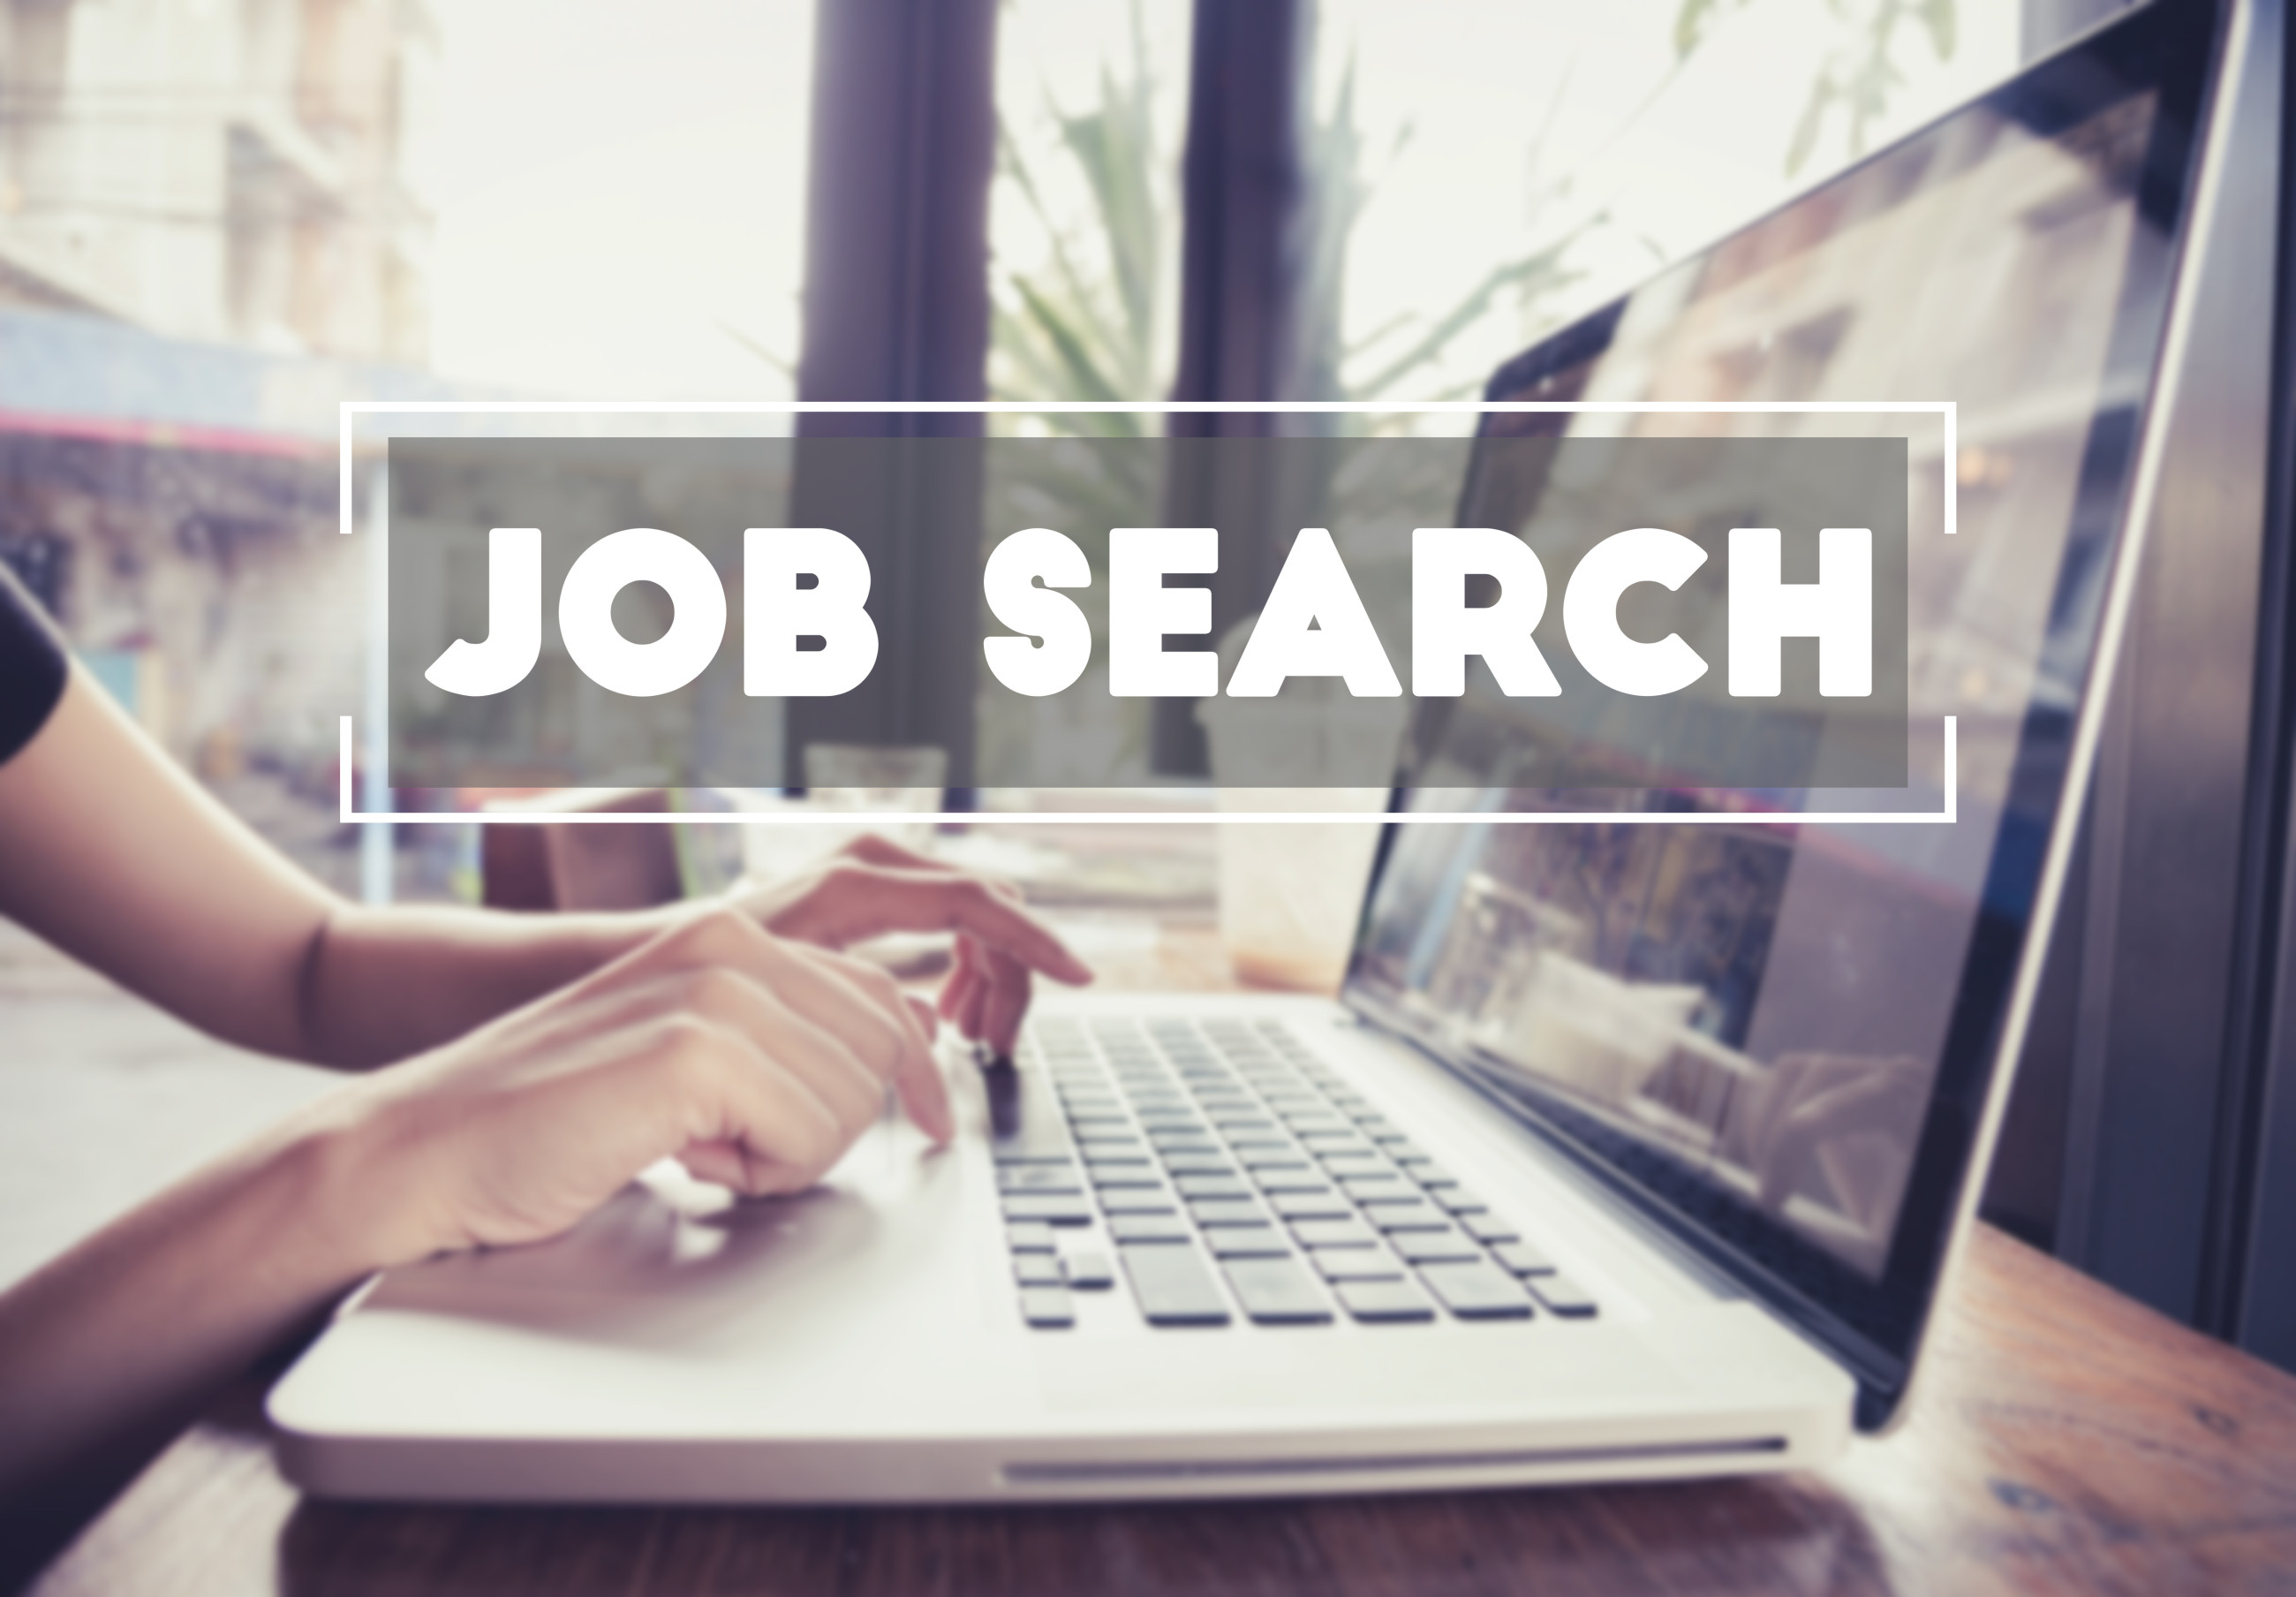 Image of hands using laptop, screen showing 'Job Search' in large font